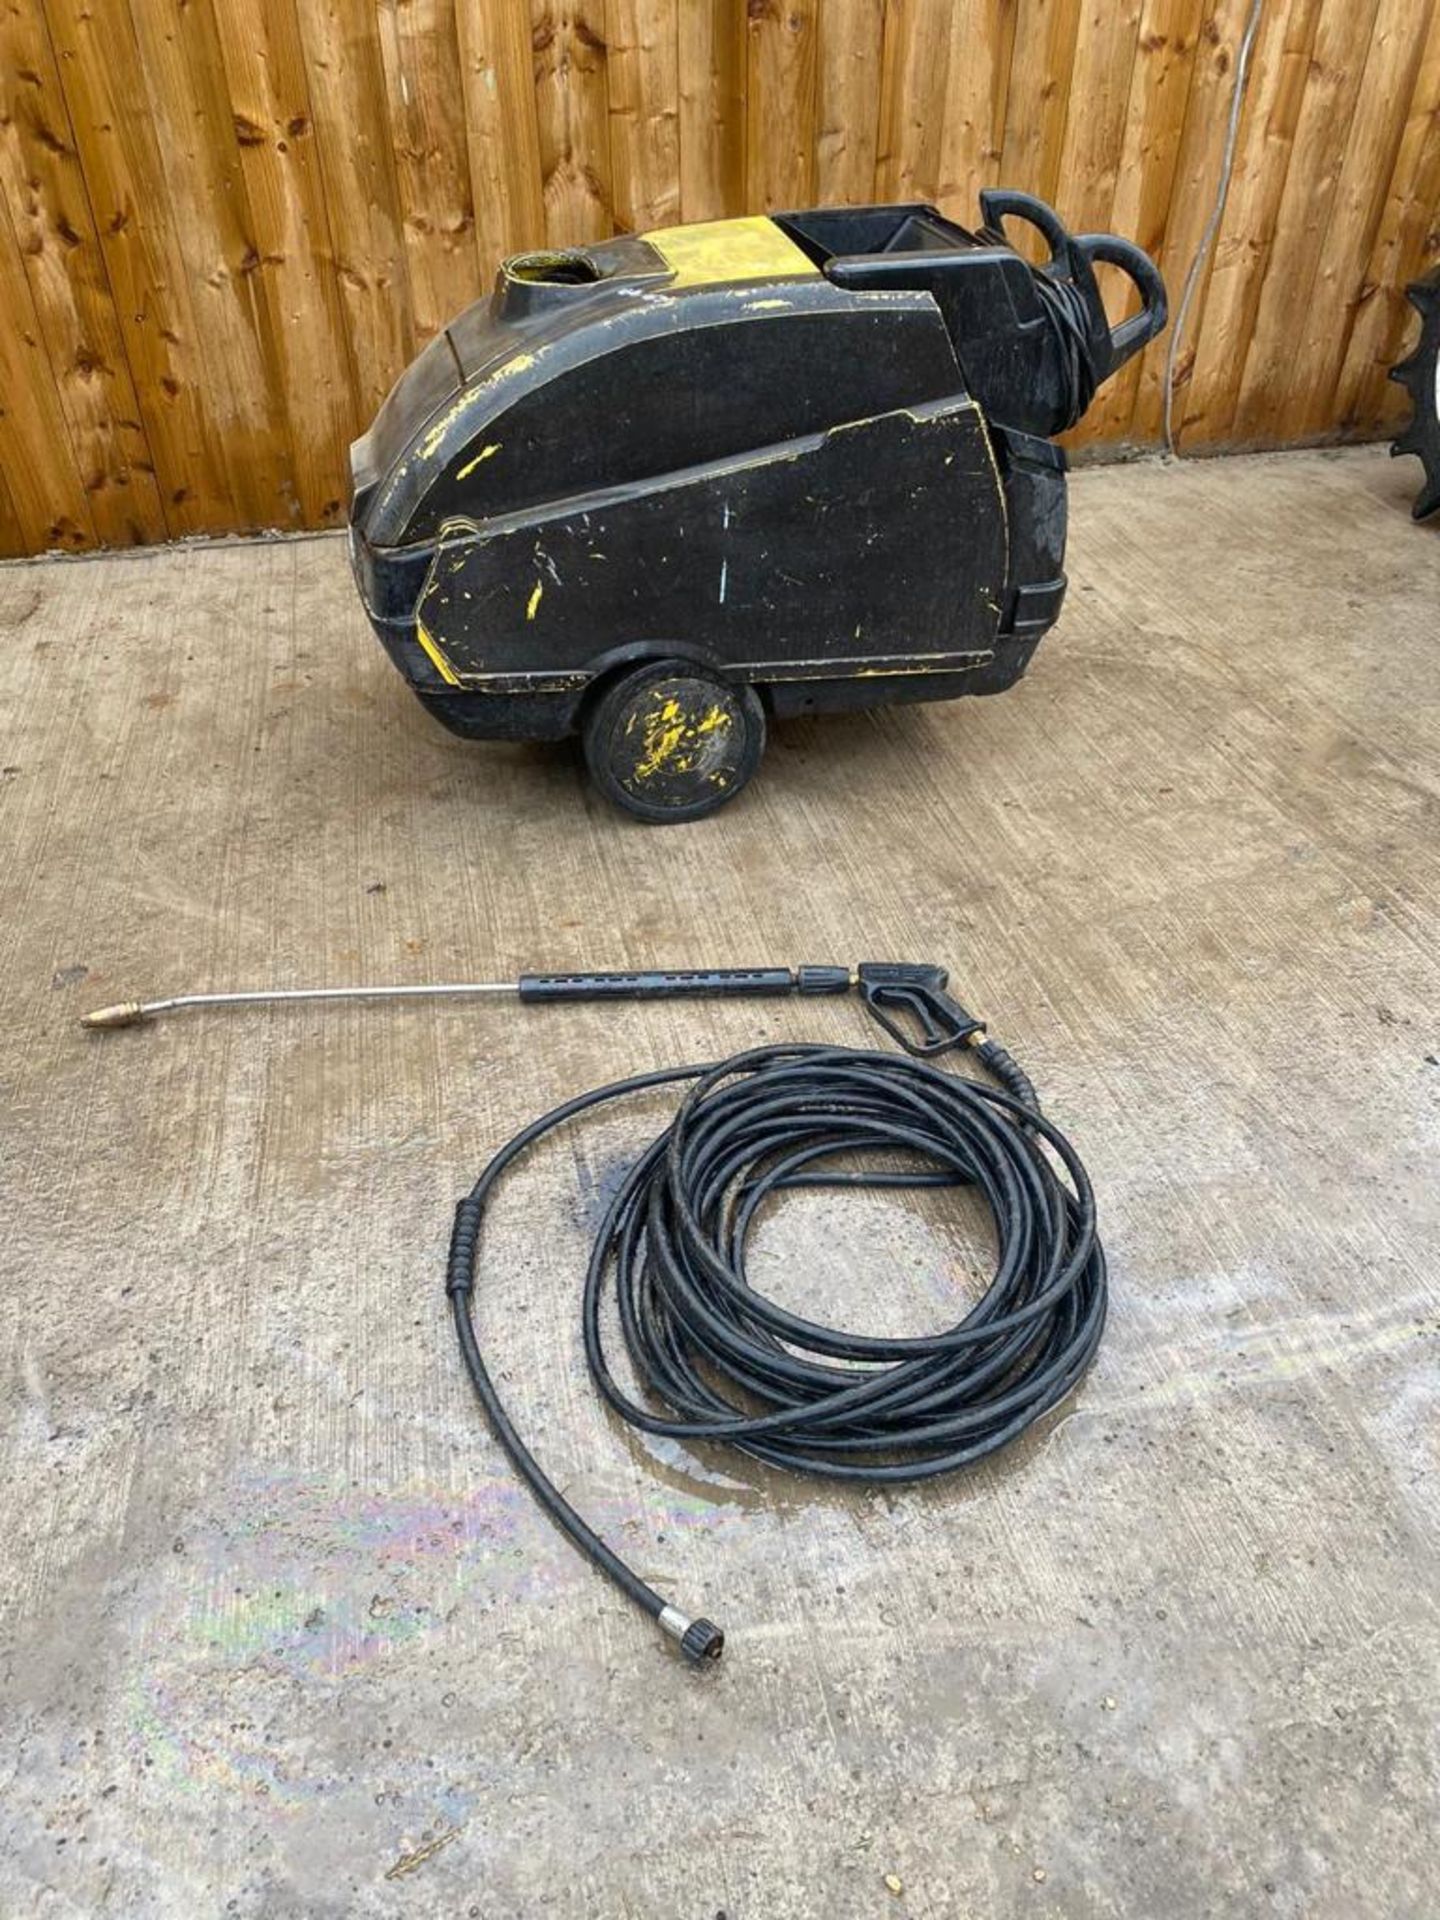 KARCHER DIESEL POWER WASHER HOT AND COLD, DELIVERY ANYWHERE UK £100 *PLUS VAT* - Image 2 of 3